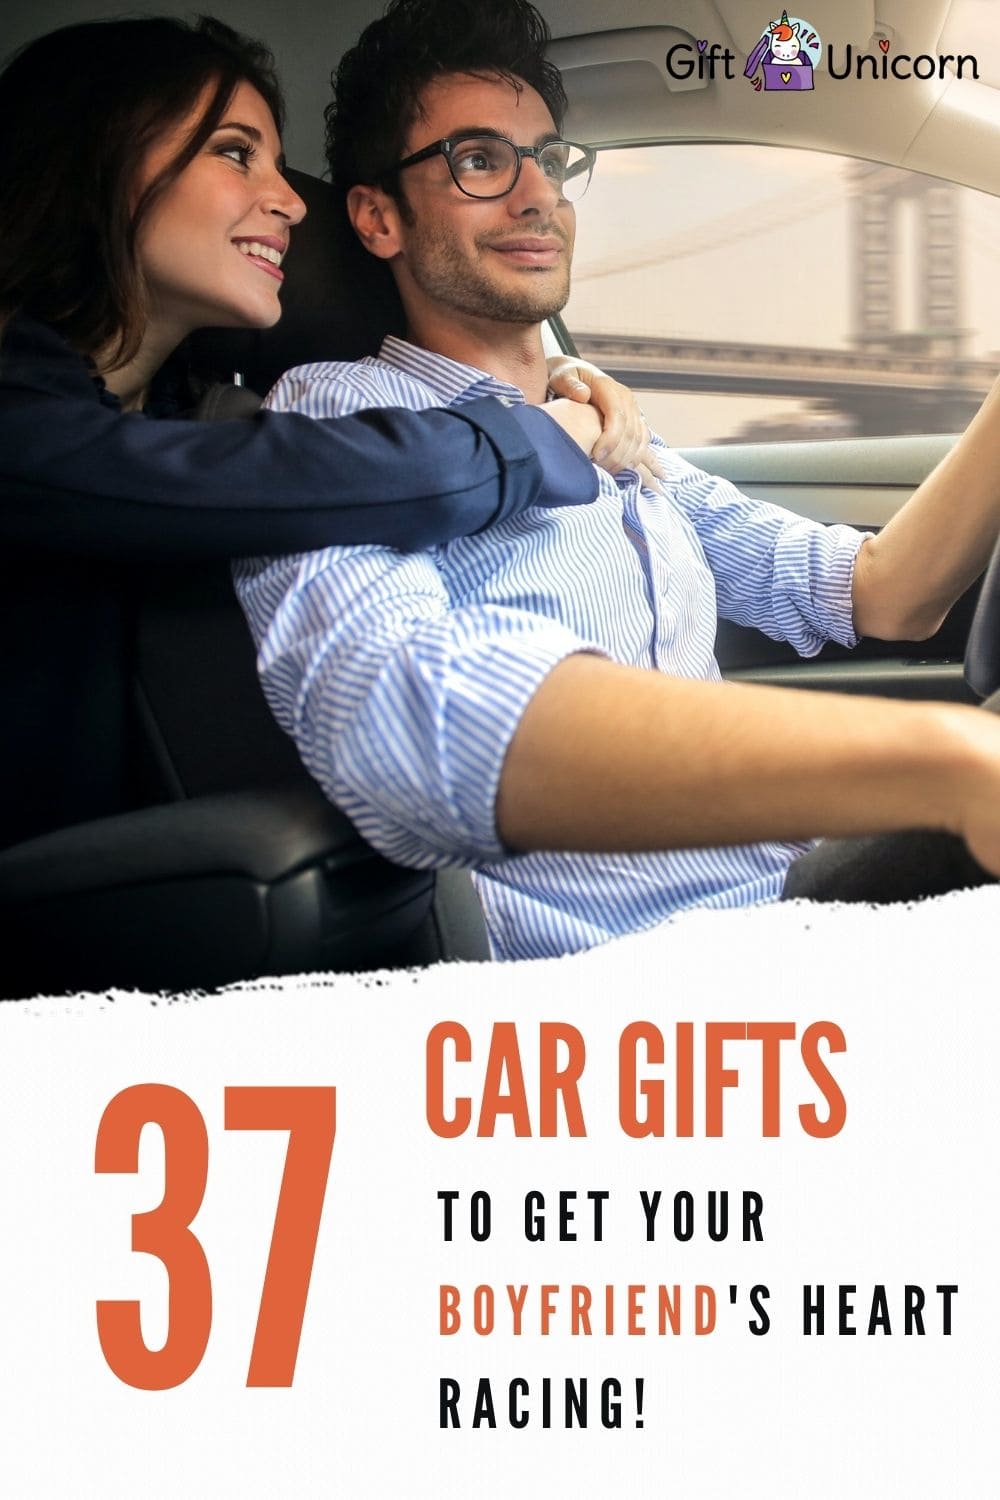 37 Car Gifts To Get Your Boyfriend’s Heart Racing! - pinterest pin image